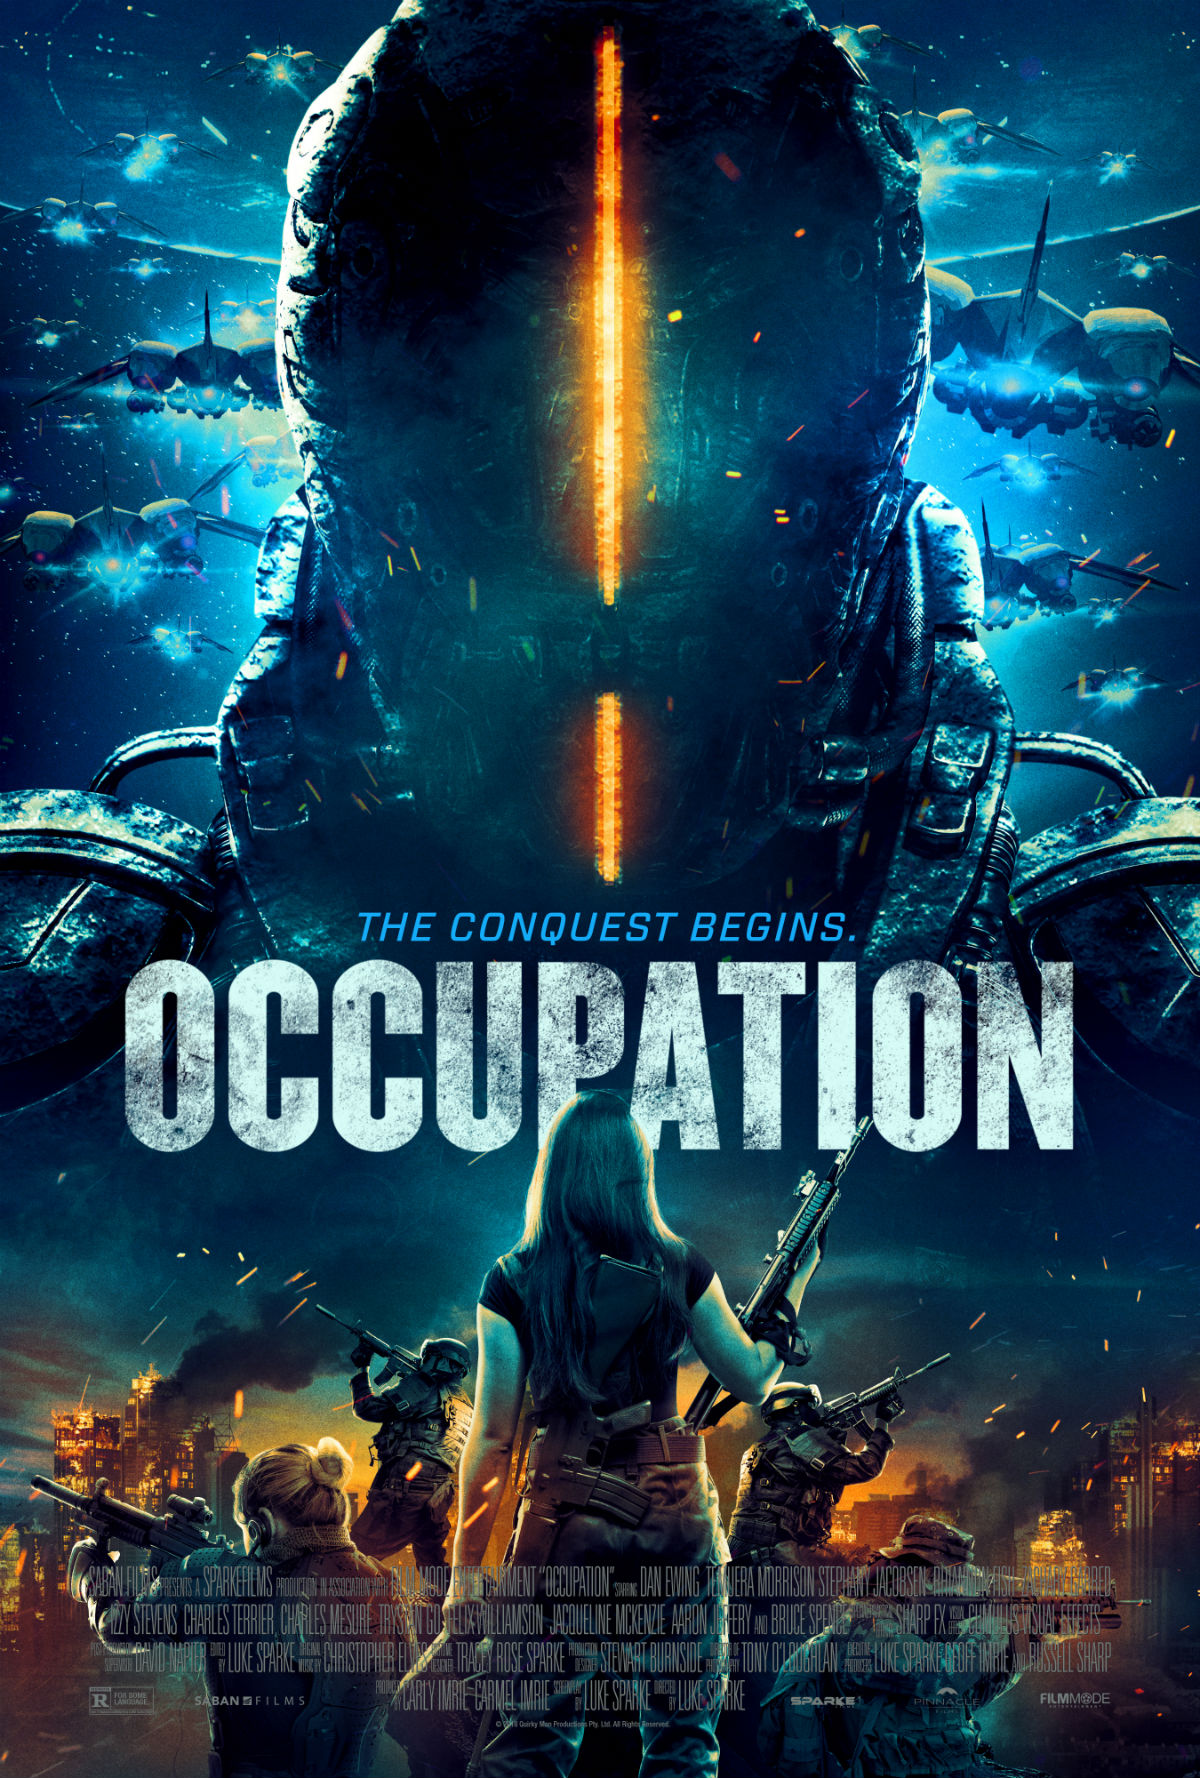 Occupation Looks Like All Of Your Favourite Alien Invasion Action Movies Rolled Into One